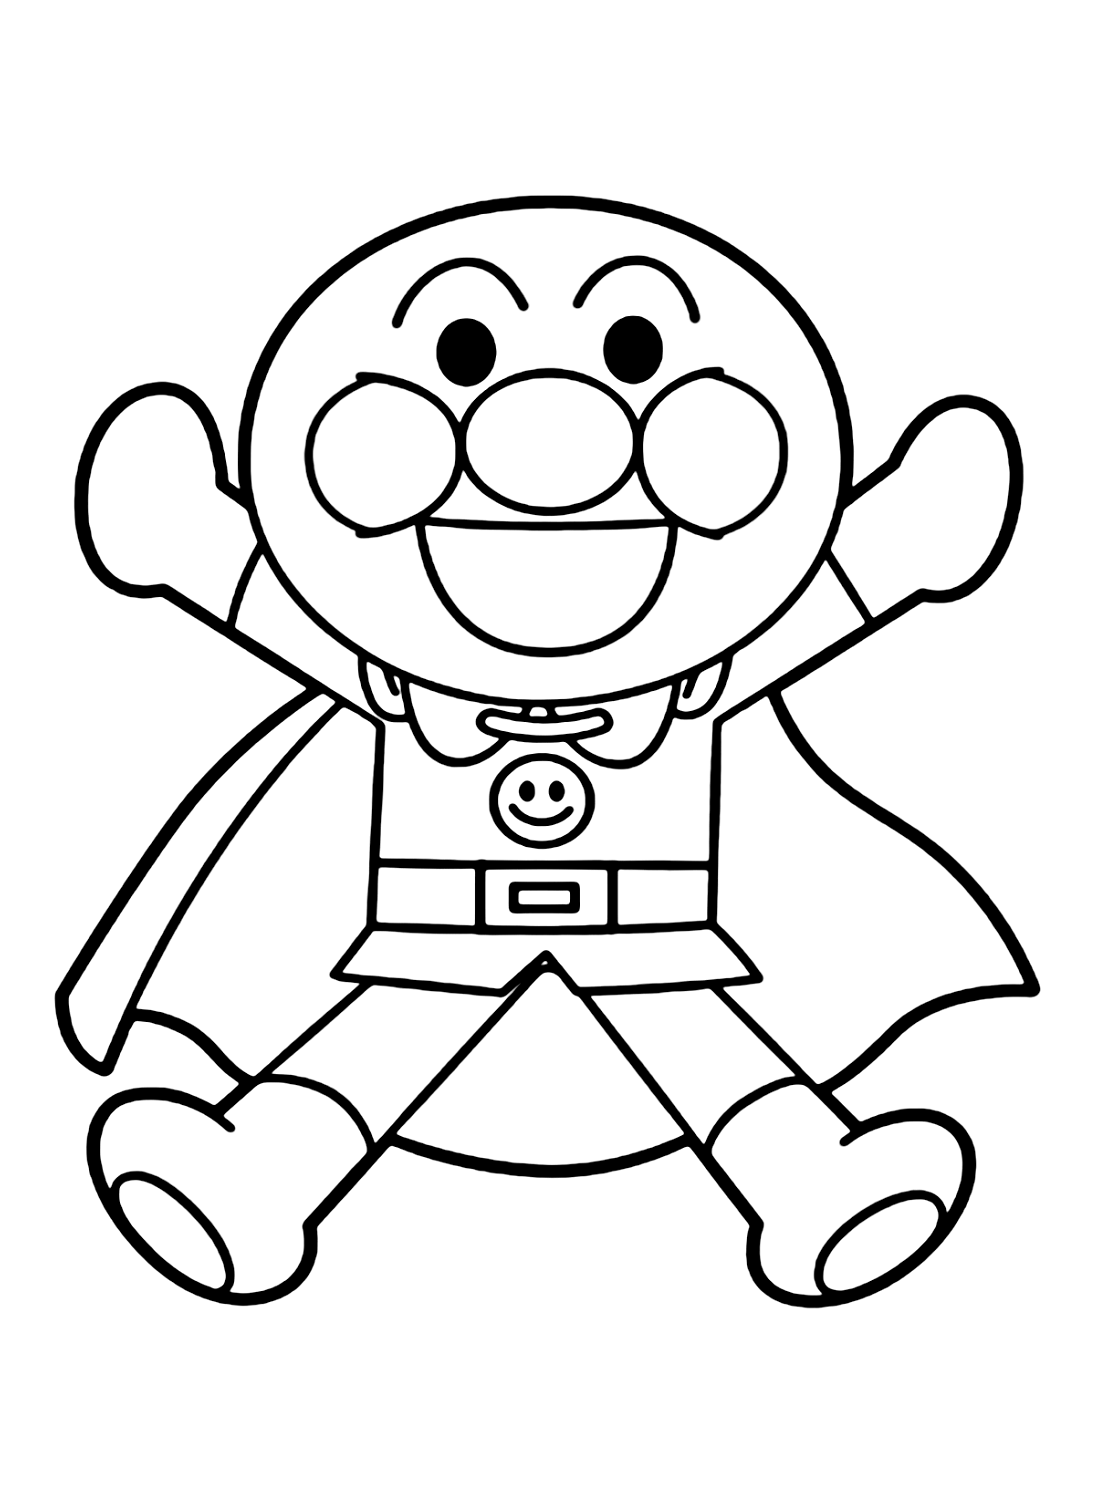 Anpanman coloring pages printable for free download